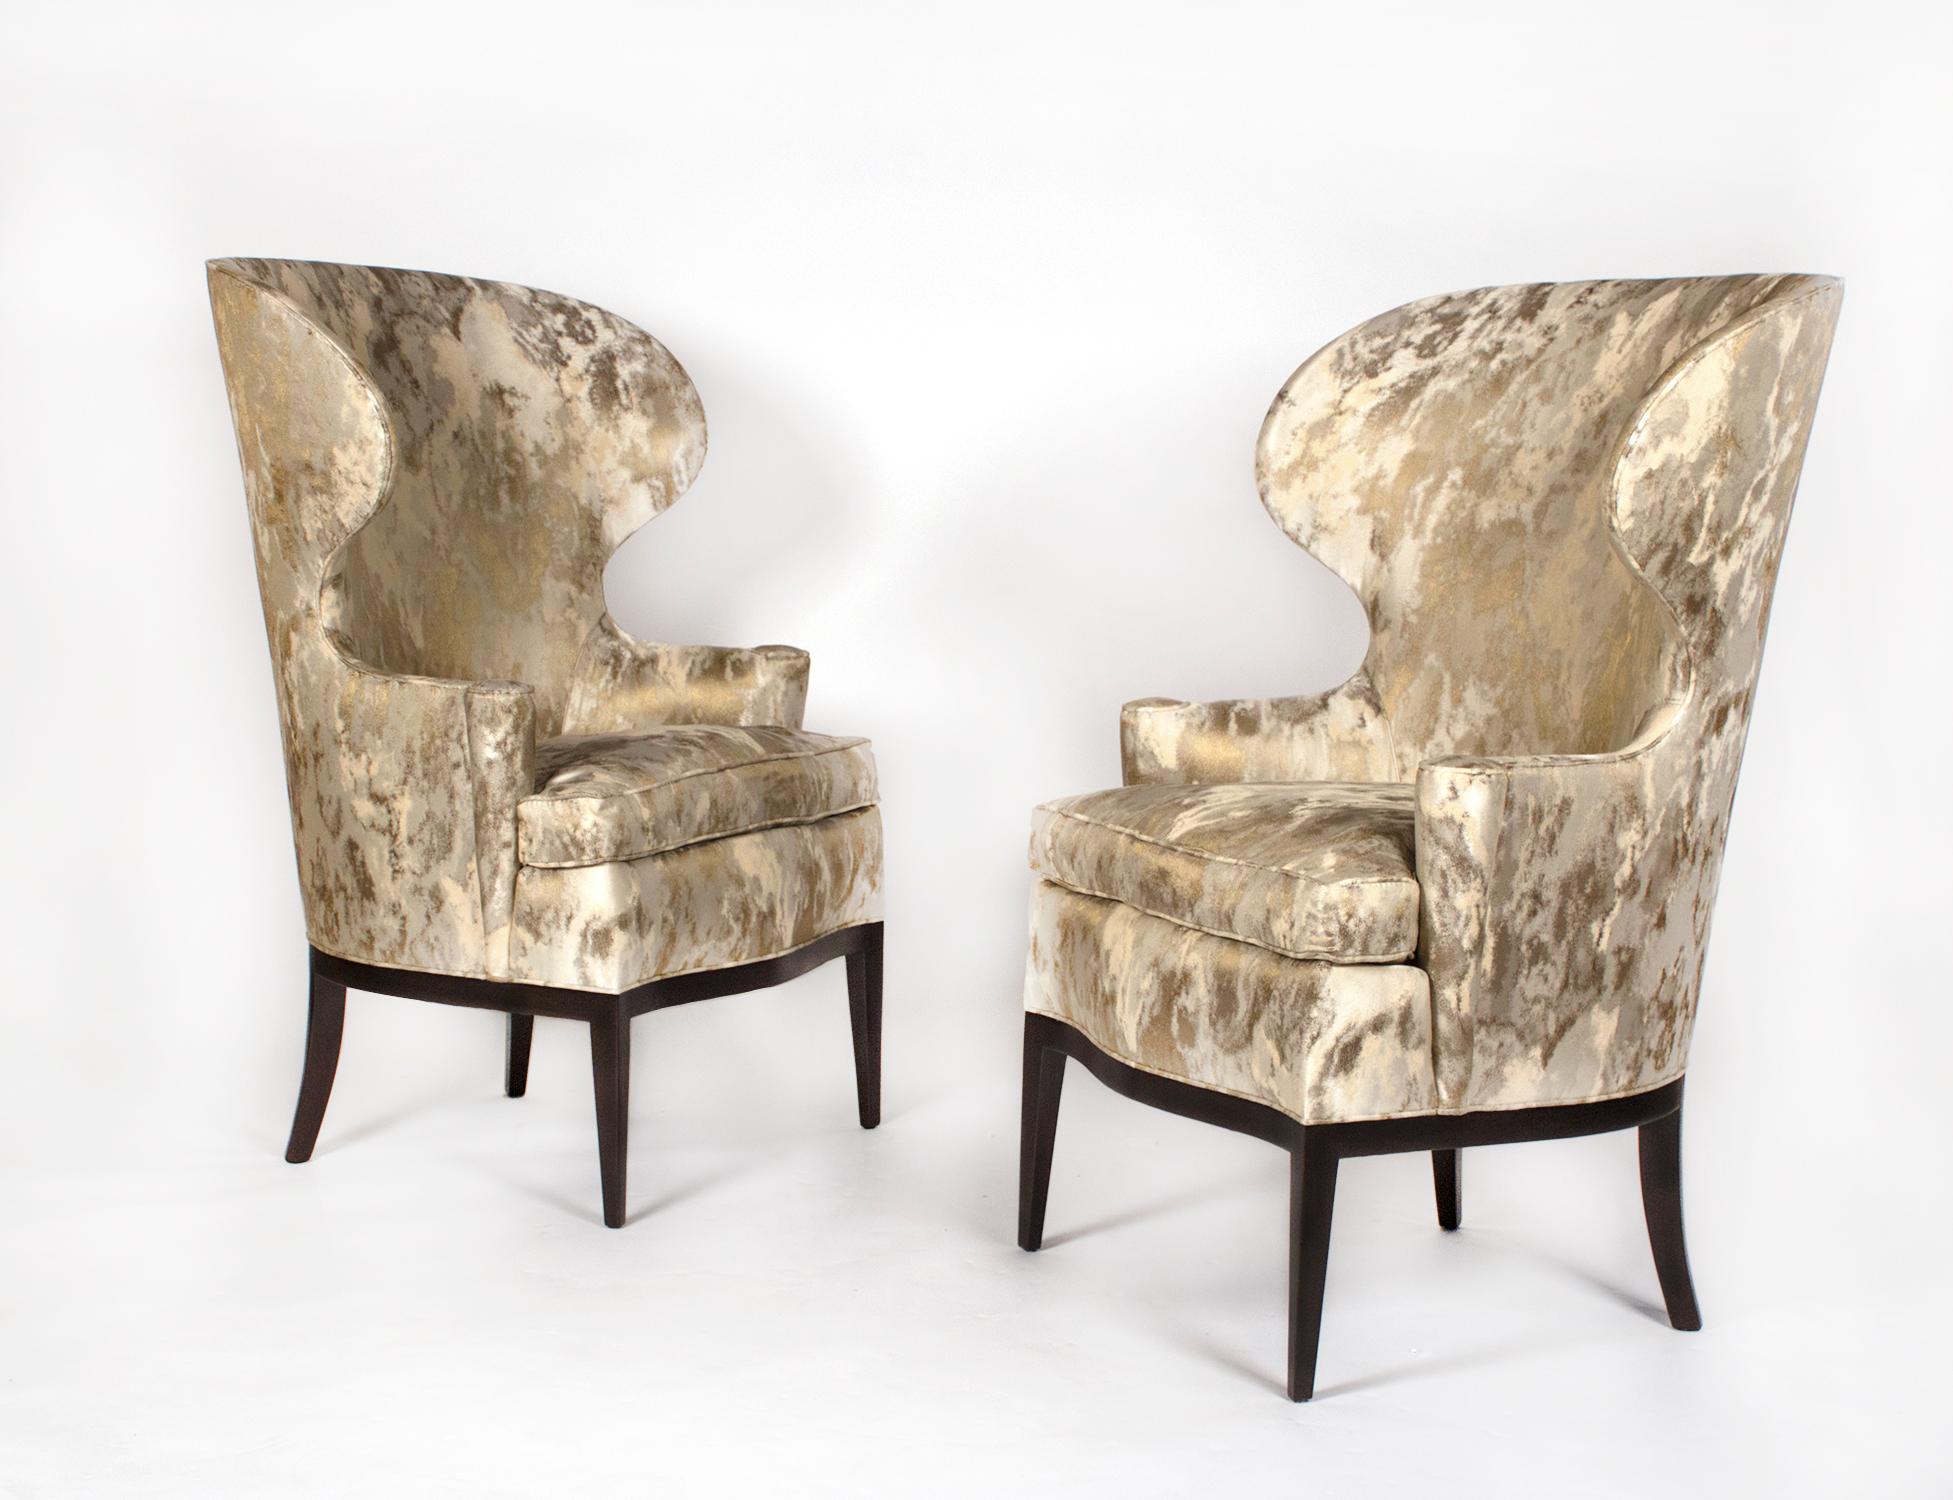 Pair of early and important wing back chairs designed by Edward Wormley for Dunbar. Professionally restored with new foam, new springs, down-filled seat cushions and upholstered in a custom-made textile produced exclusively for Cartier. The